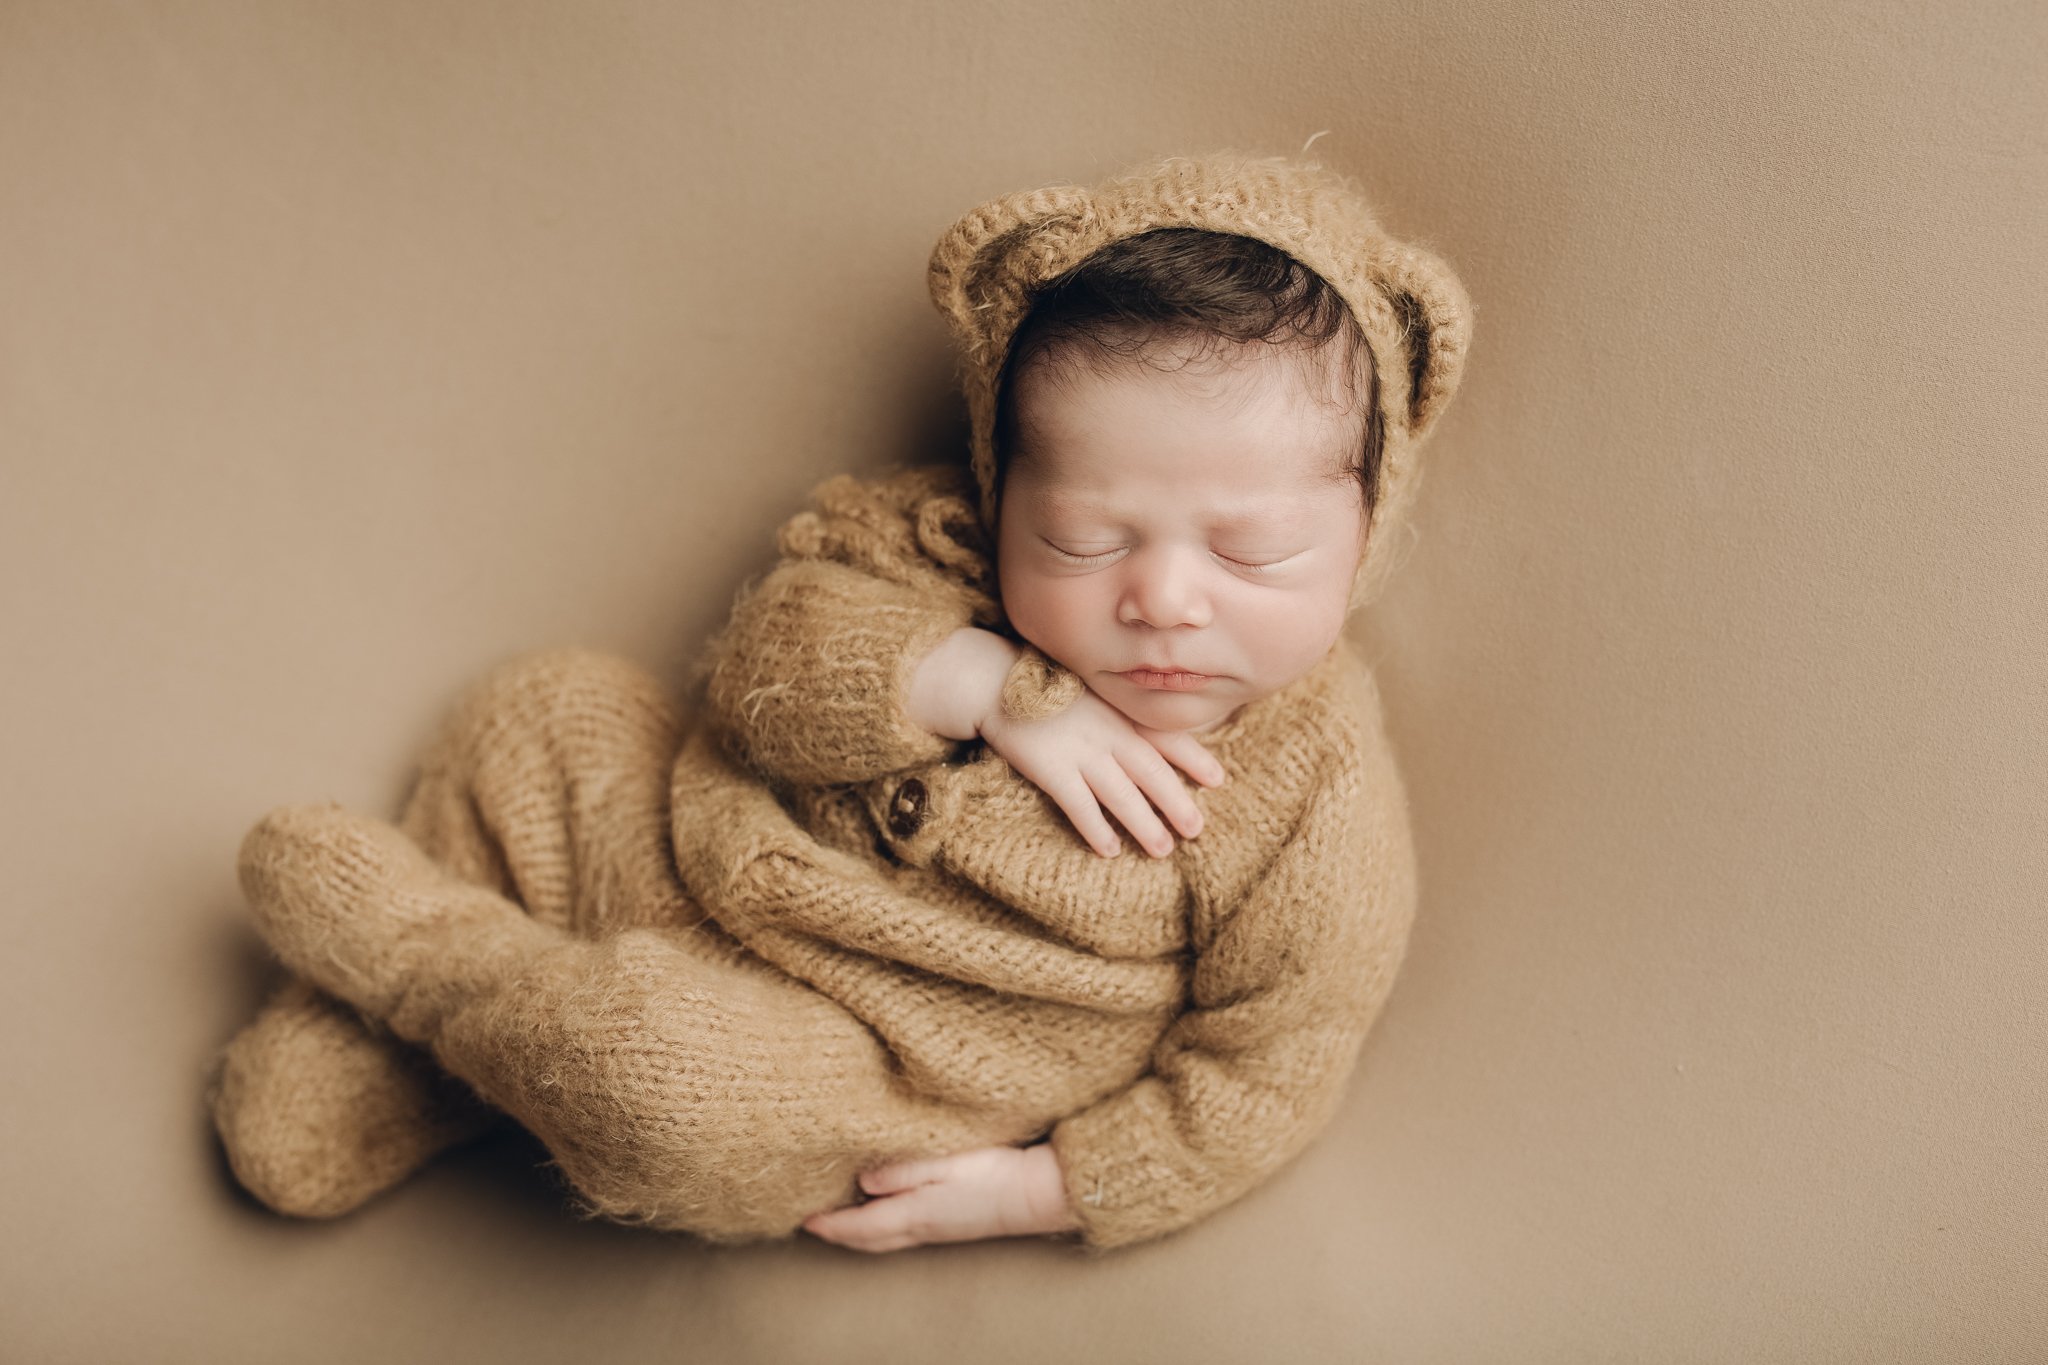 Baby_Boy_Newborn_Bear_Outfit_Posing_Props_Tan_Brown_Neutral_Studio_by_Newborn_Photographer_Christie_Leigh_Photo_in_Youngstown_OH_Ohio_Mahoning_County-1-1.jpg